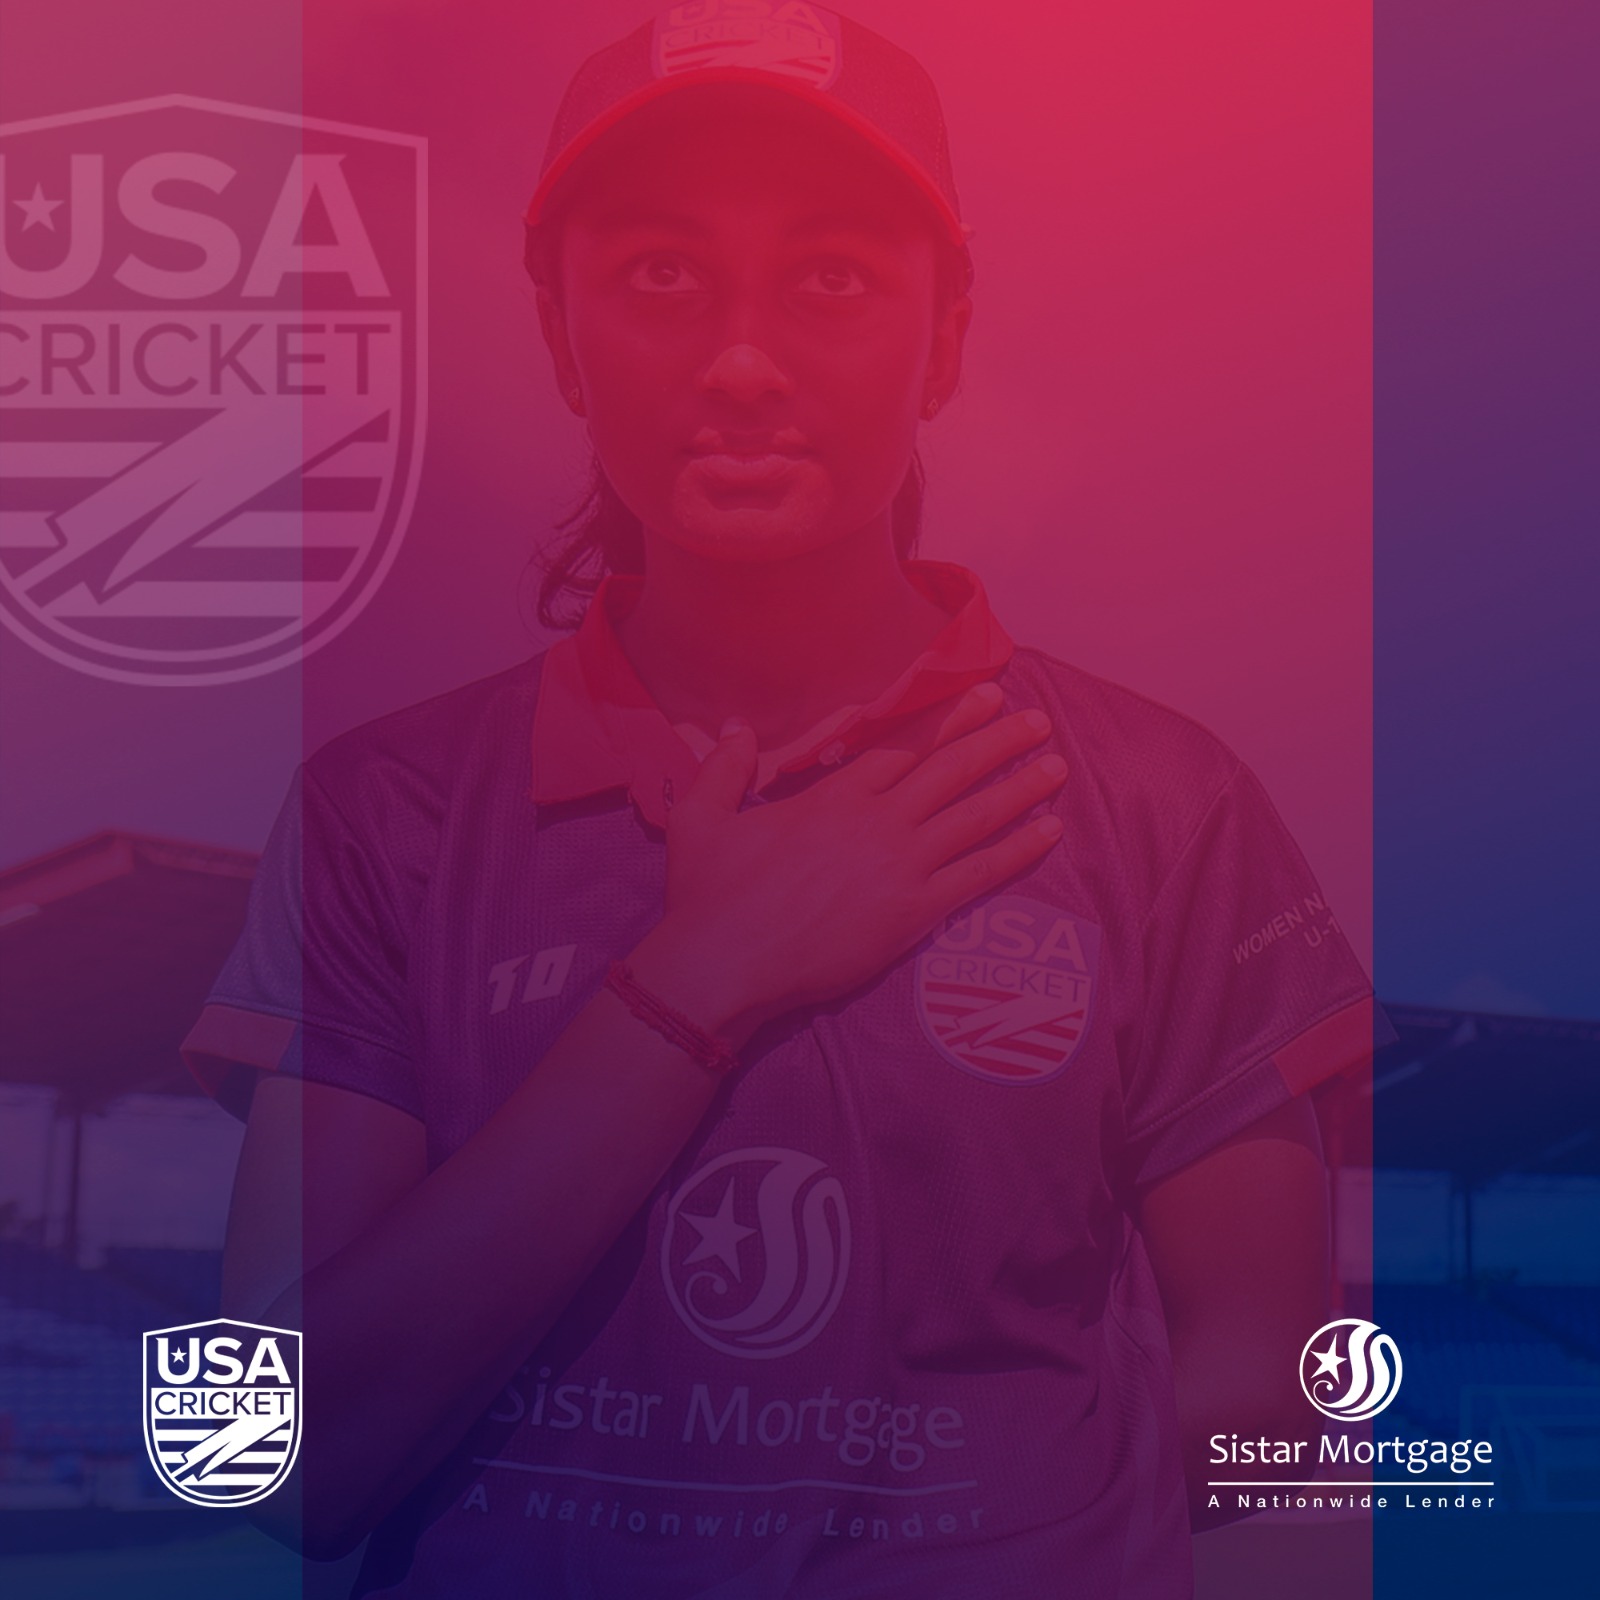 USA Cricket Launches Plan to Shape the Future for Women and Girls in American Cricket